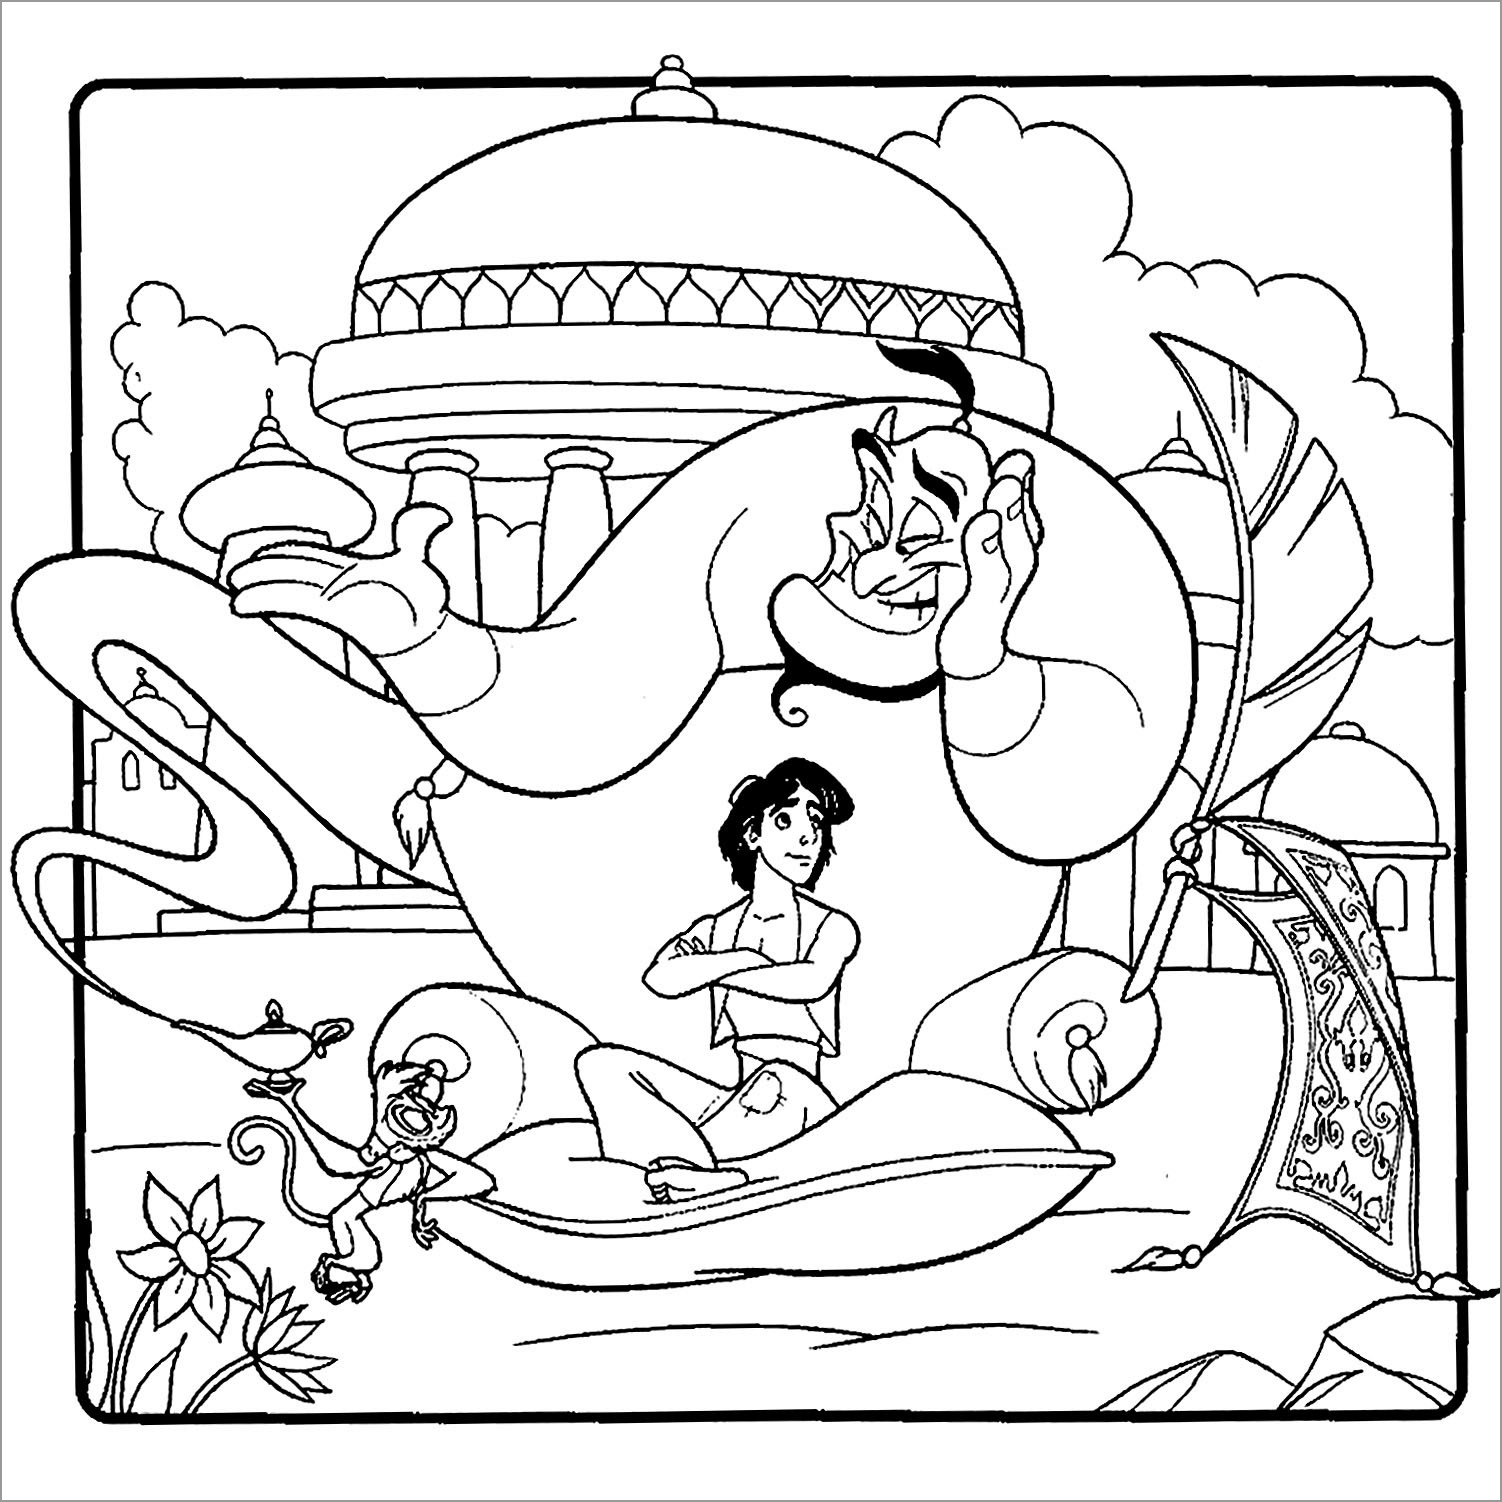 Aladdin, Abu and Genie Coloring Page to Print